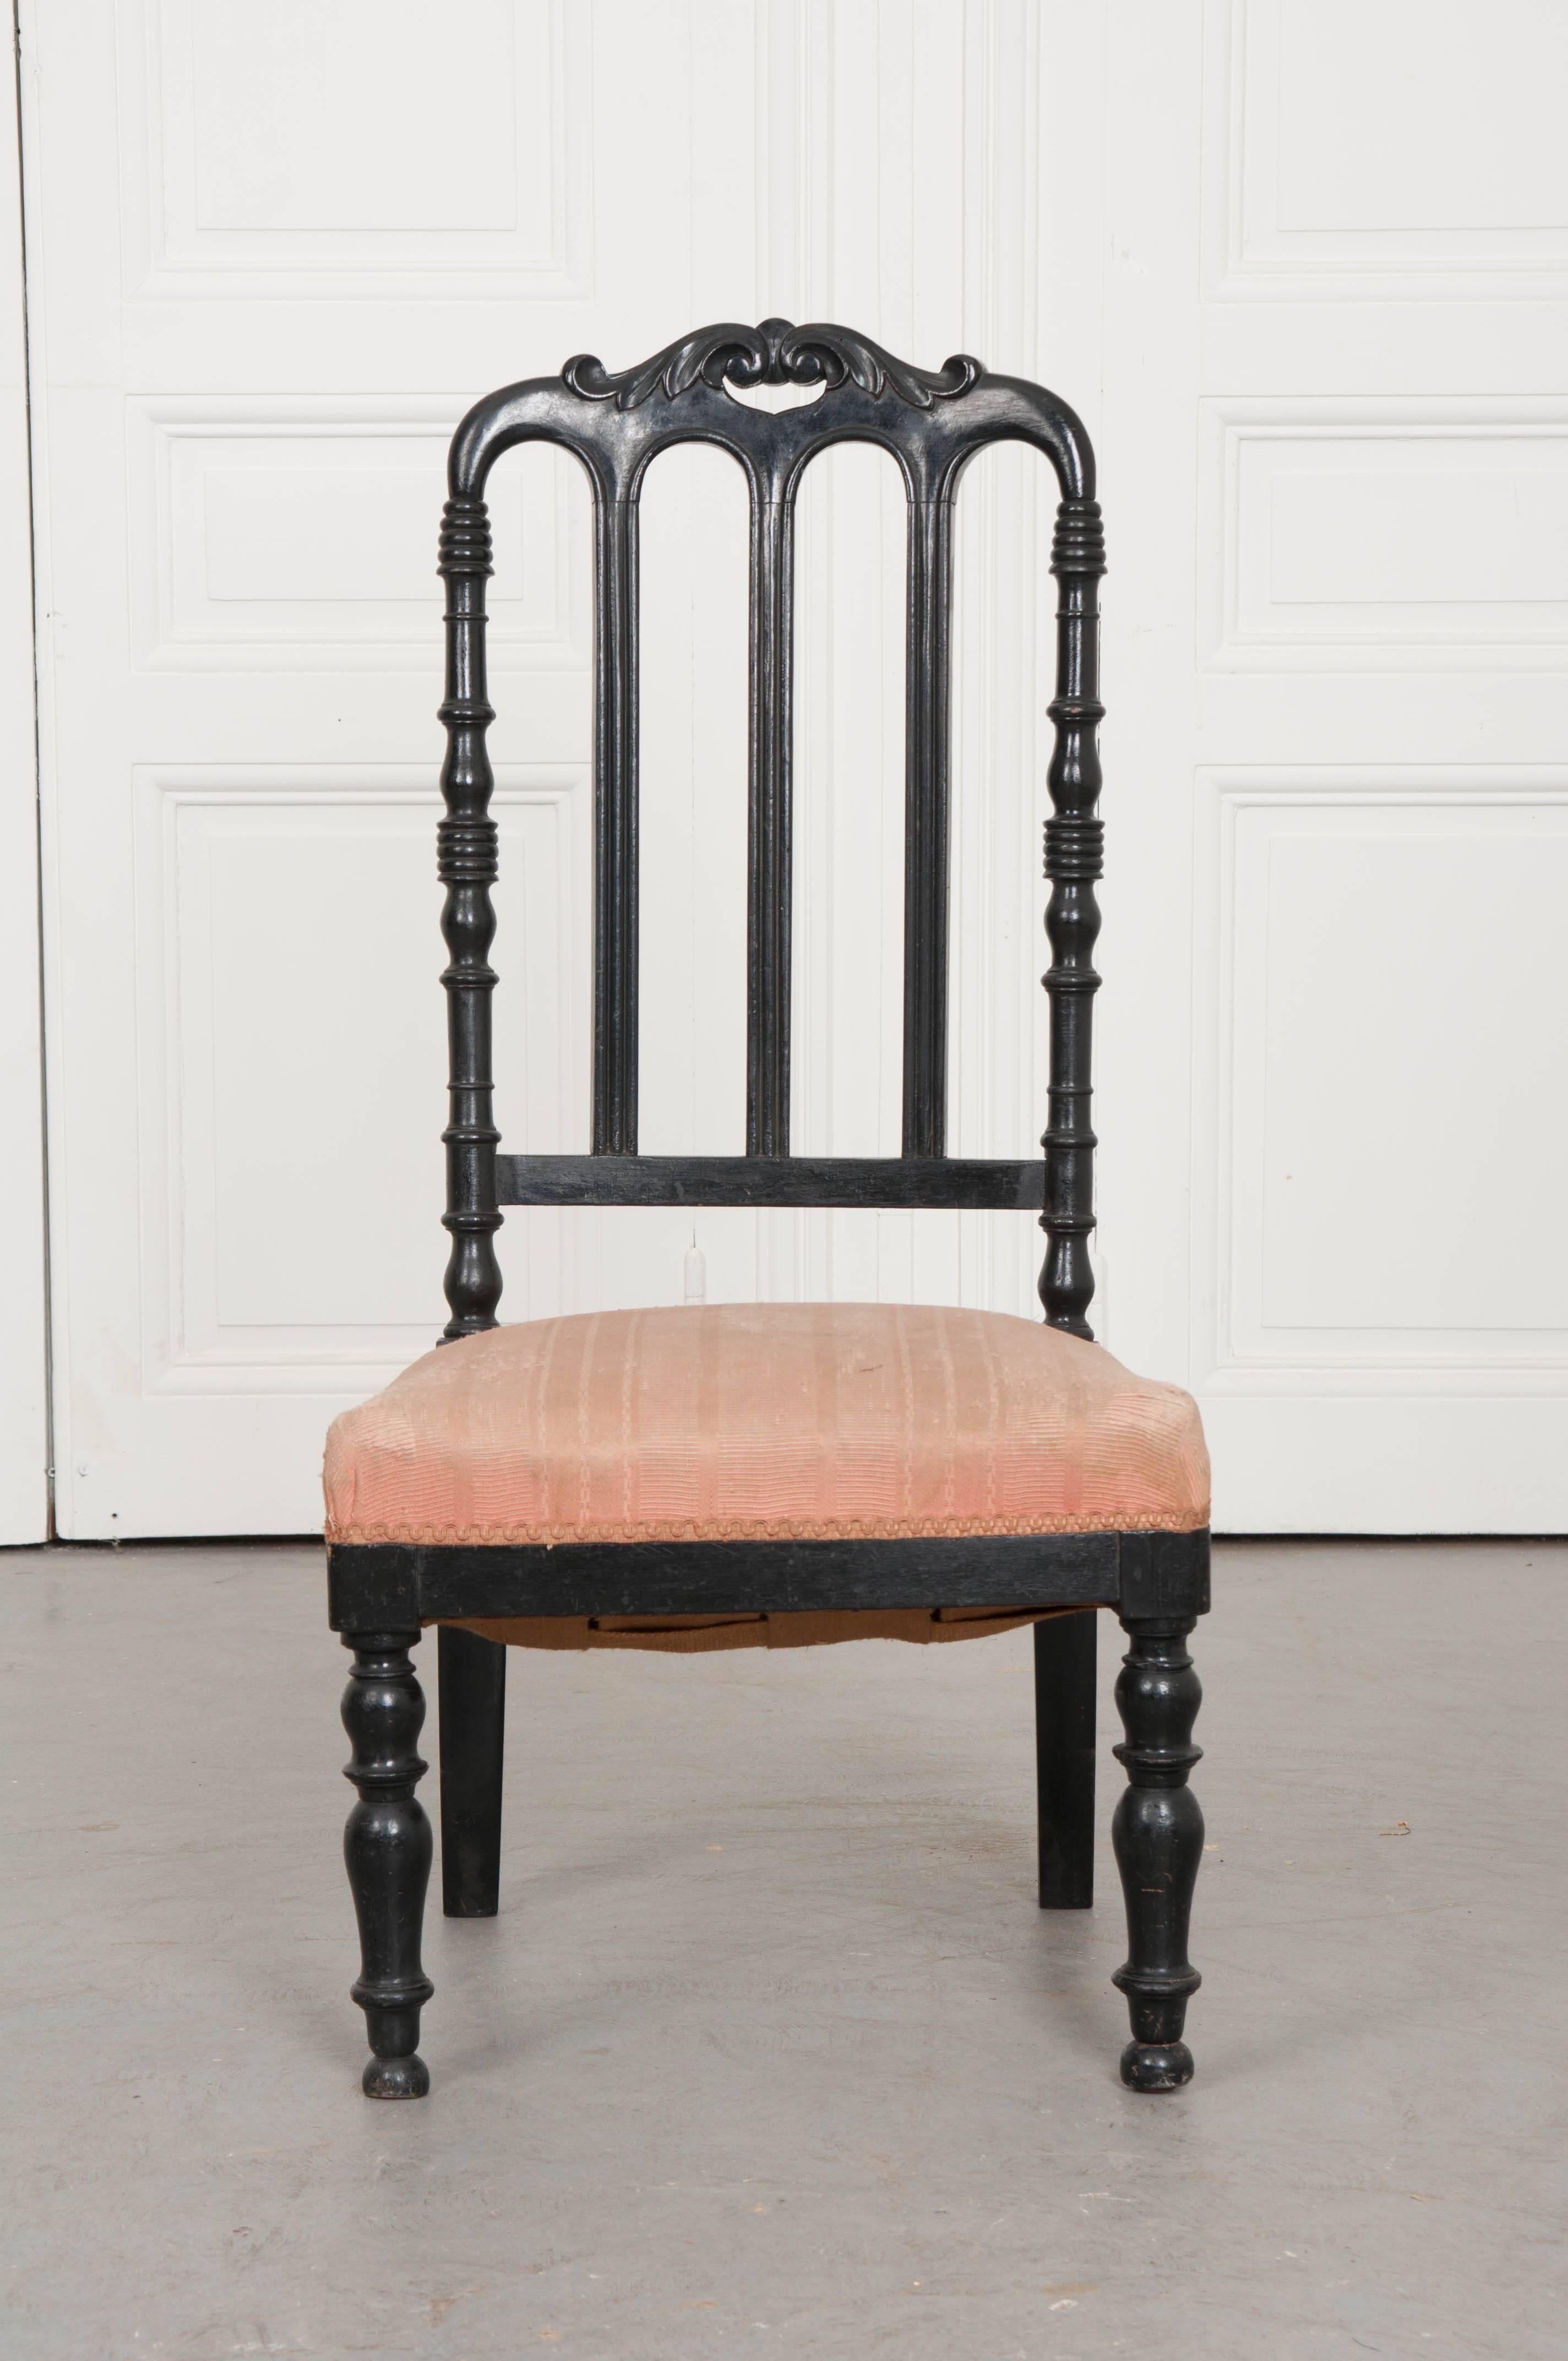 A precious ebony slipper chair from 19th century France. The ebony chair has an ornately carved crest rail that is pierced. The stiles are brilliantly turned and have ribbed motifs. The three centre splats are linear with restrained carvings. The